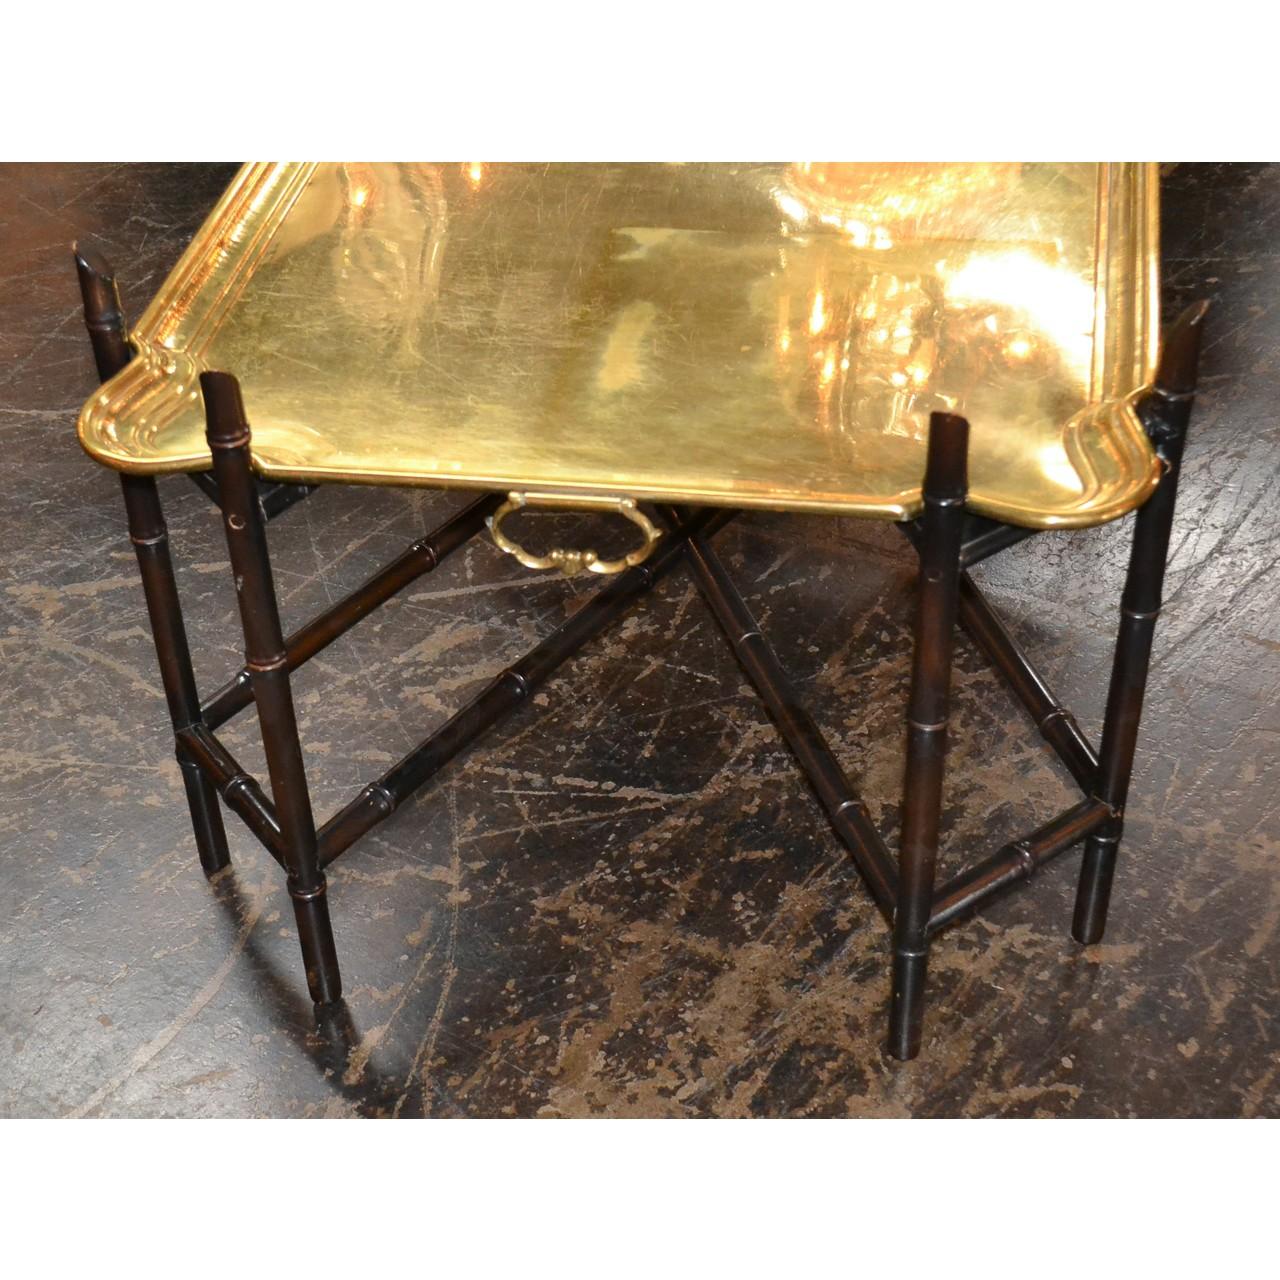 Wonderful little table for entertaining with its removable solid brass tray. Made in the midcentury possibly by furniture manufacturer Baker,
circa 1960.